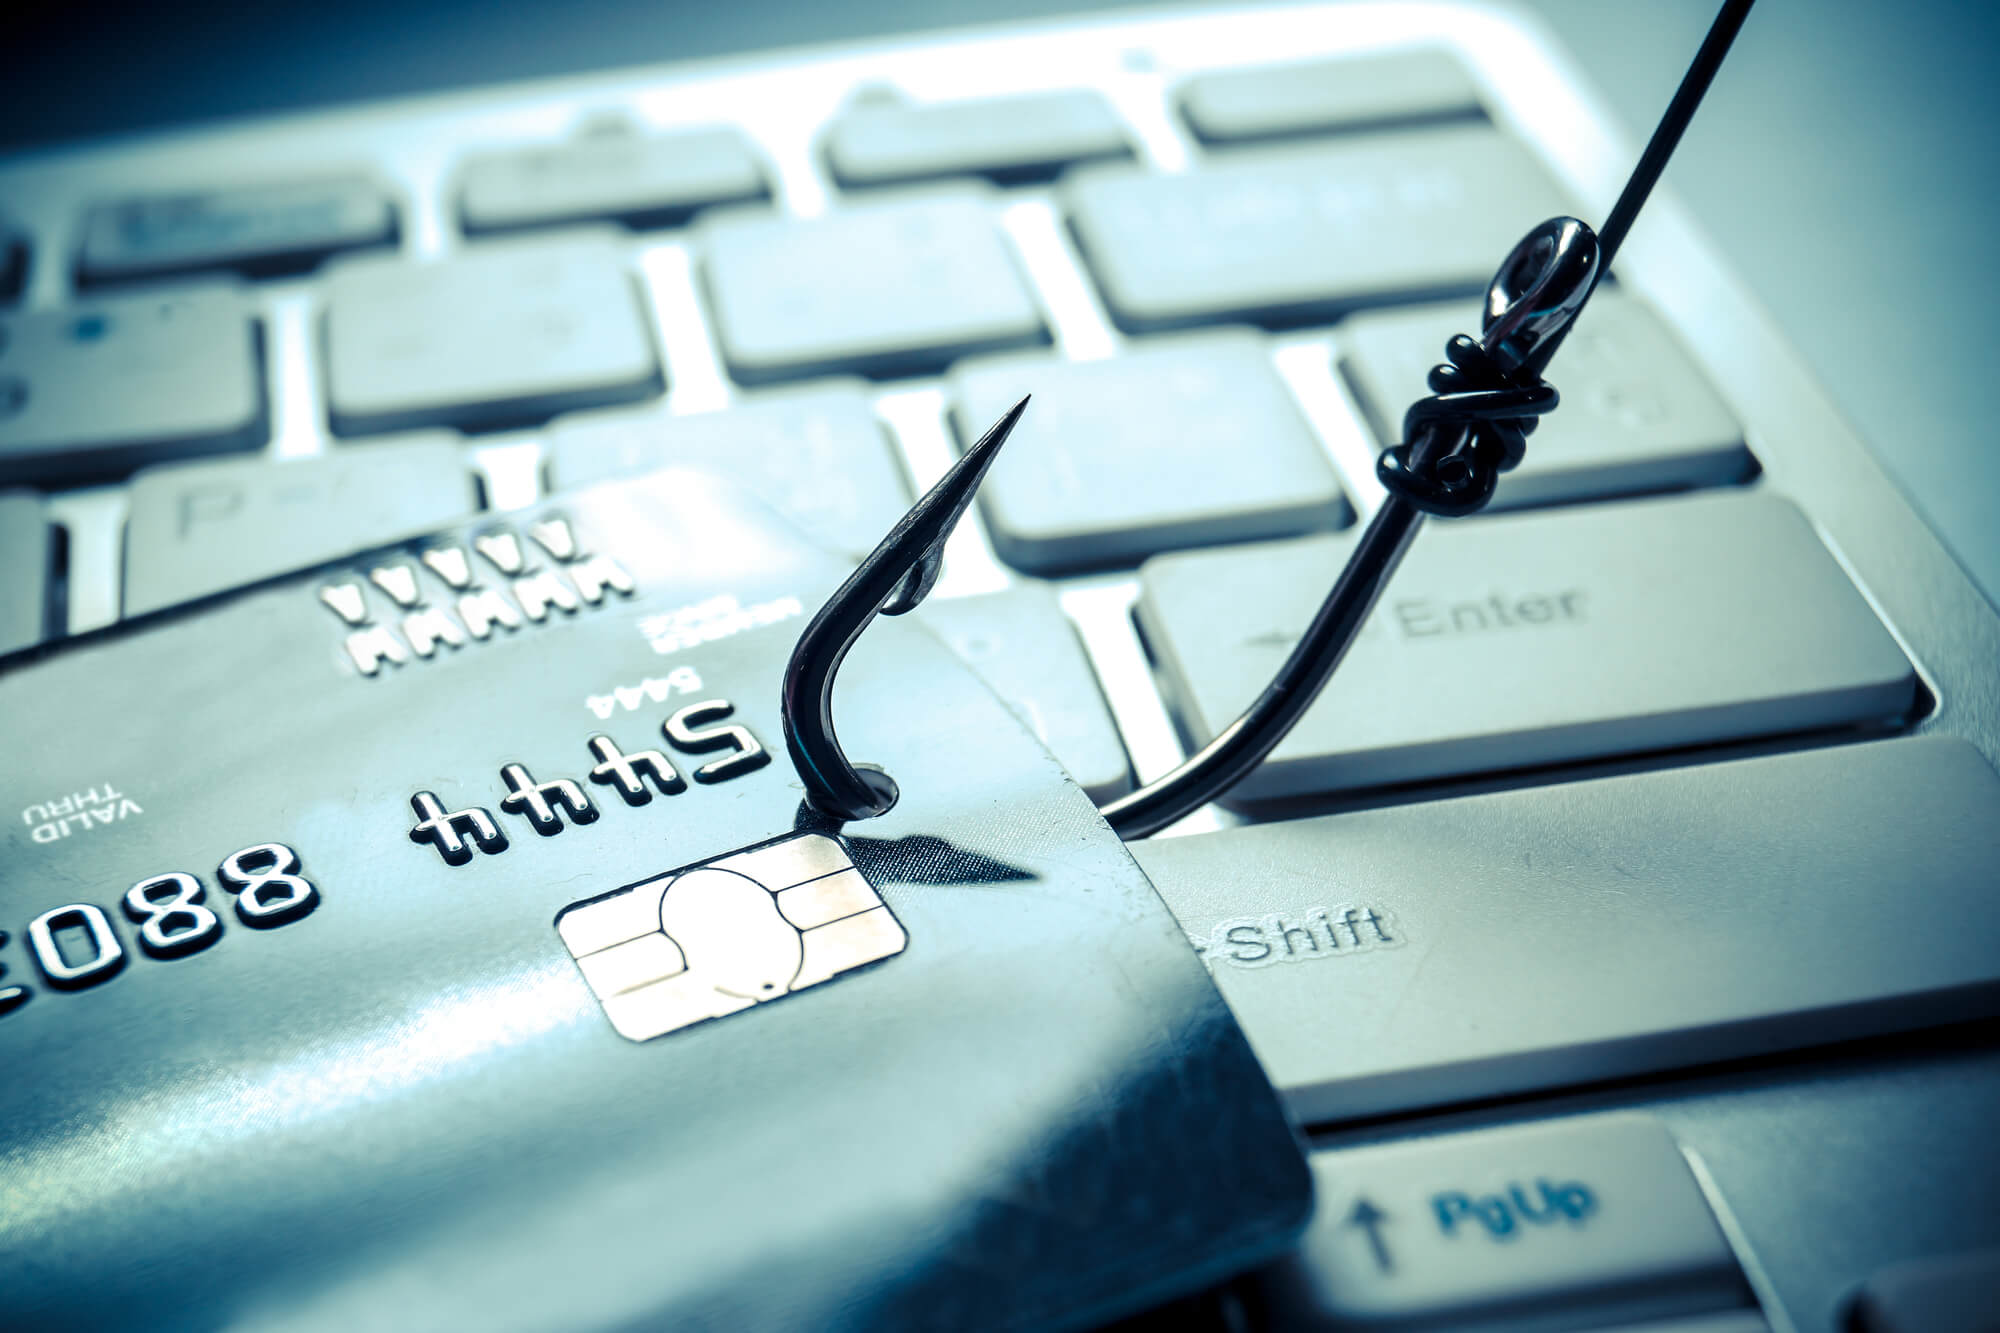 Common Indicators of a Phishing Attempt